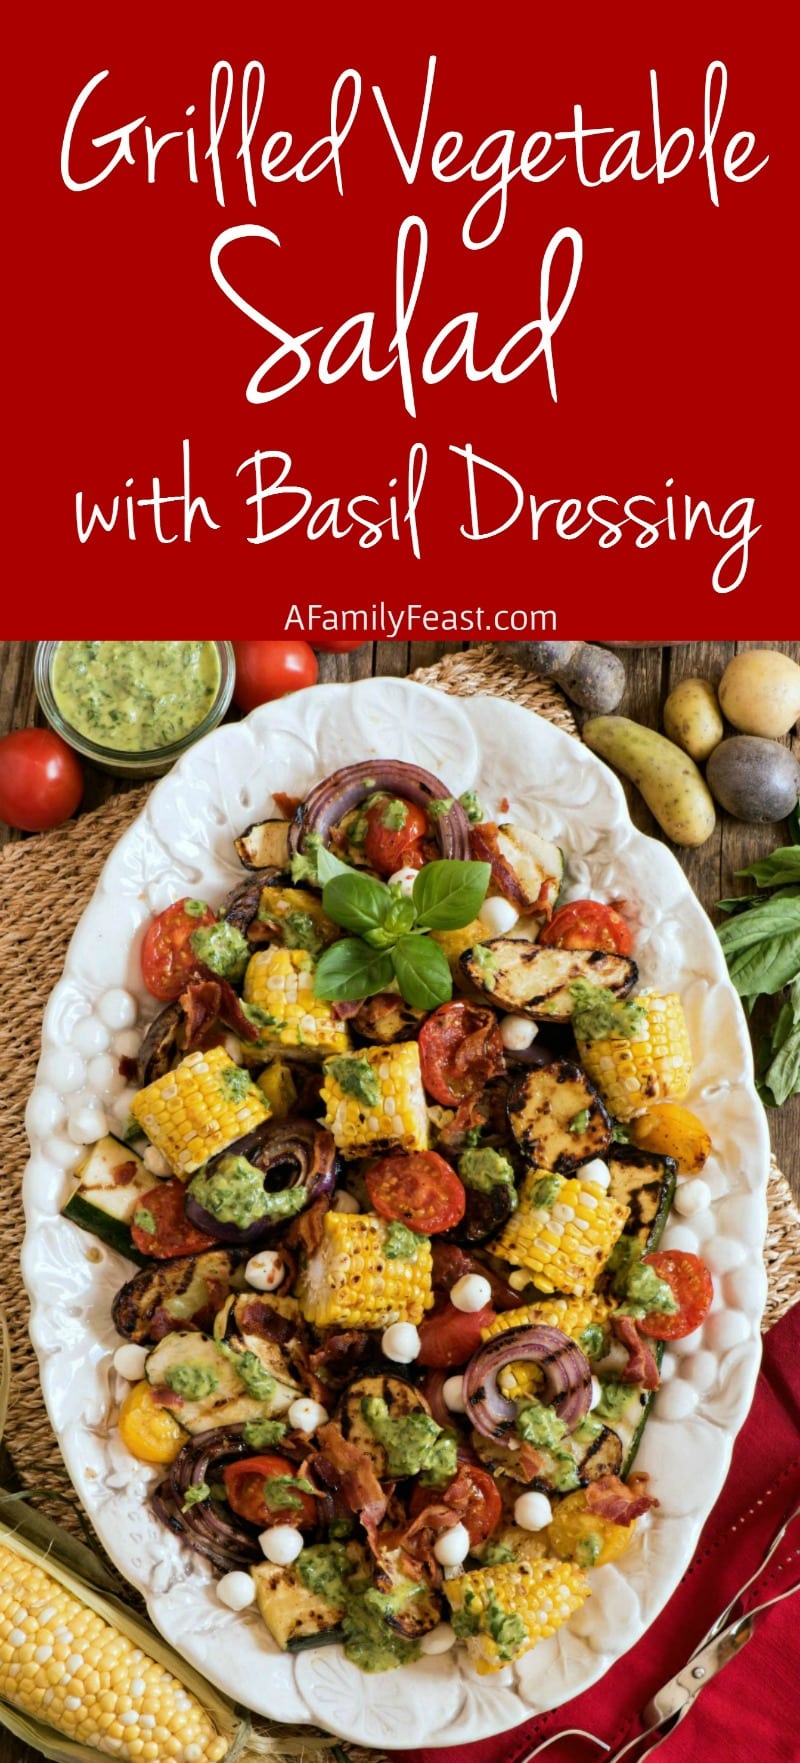 This Grilled Vegetable Salad with Basil Dressing is one of those summertime meals that your dinner guests will talk about for a long time!